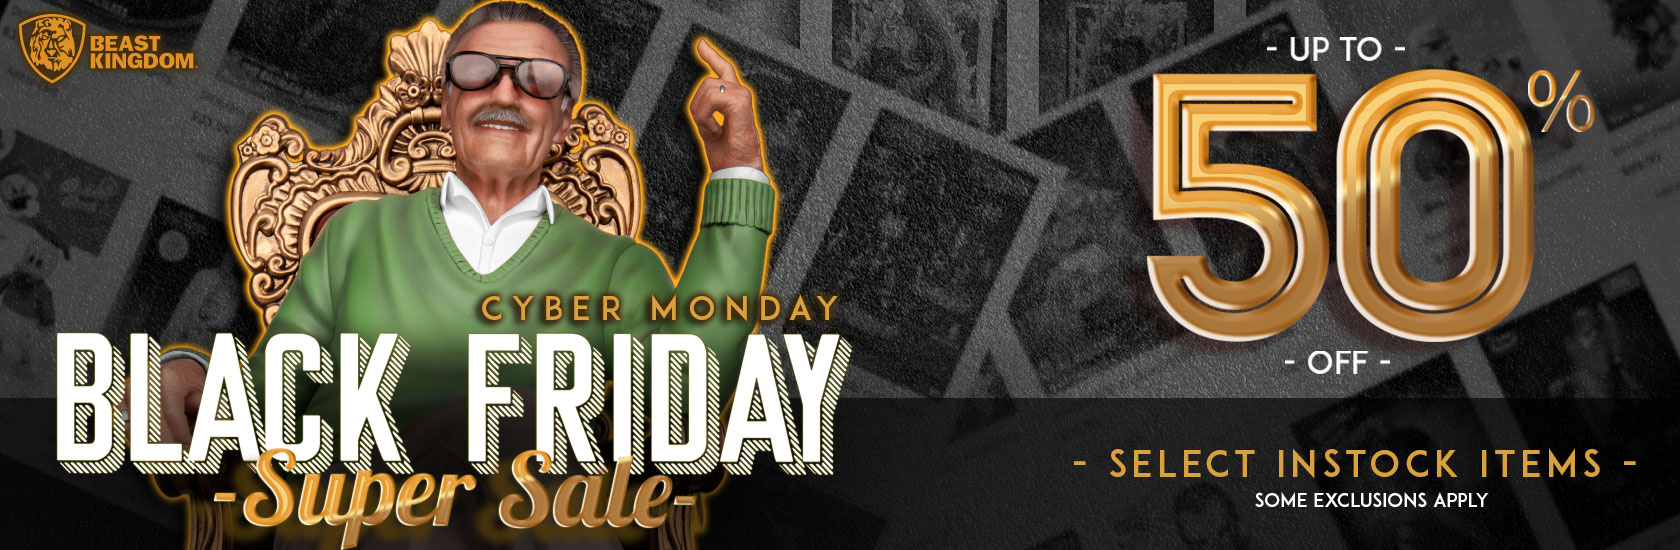 Our biggest Black Friday/Cyber Monday sale ever!